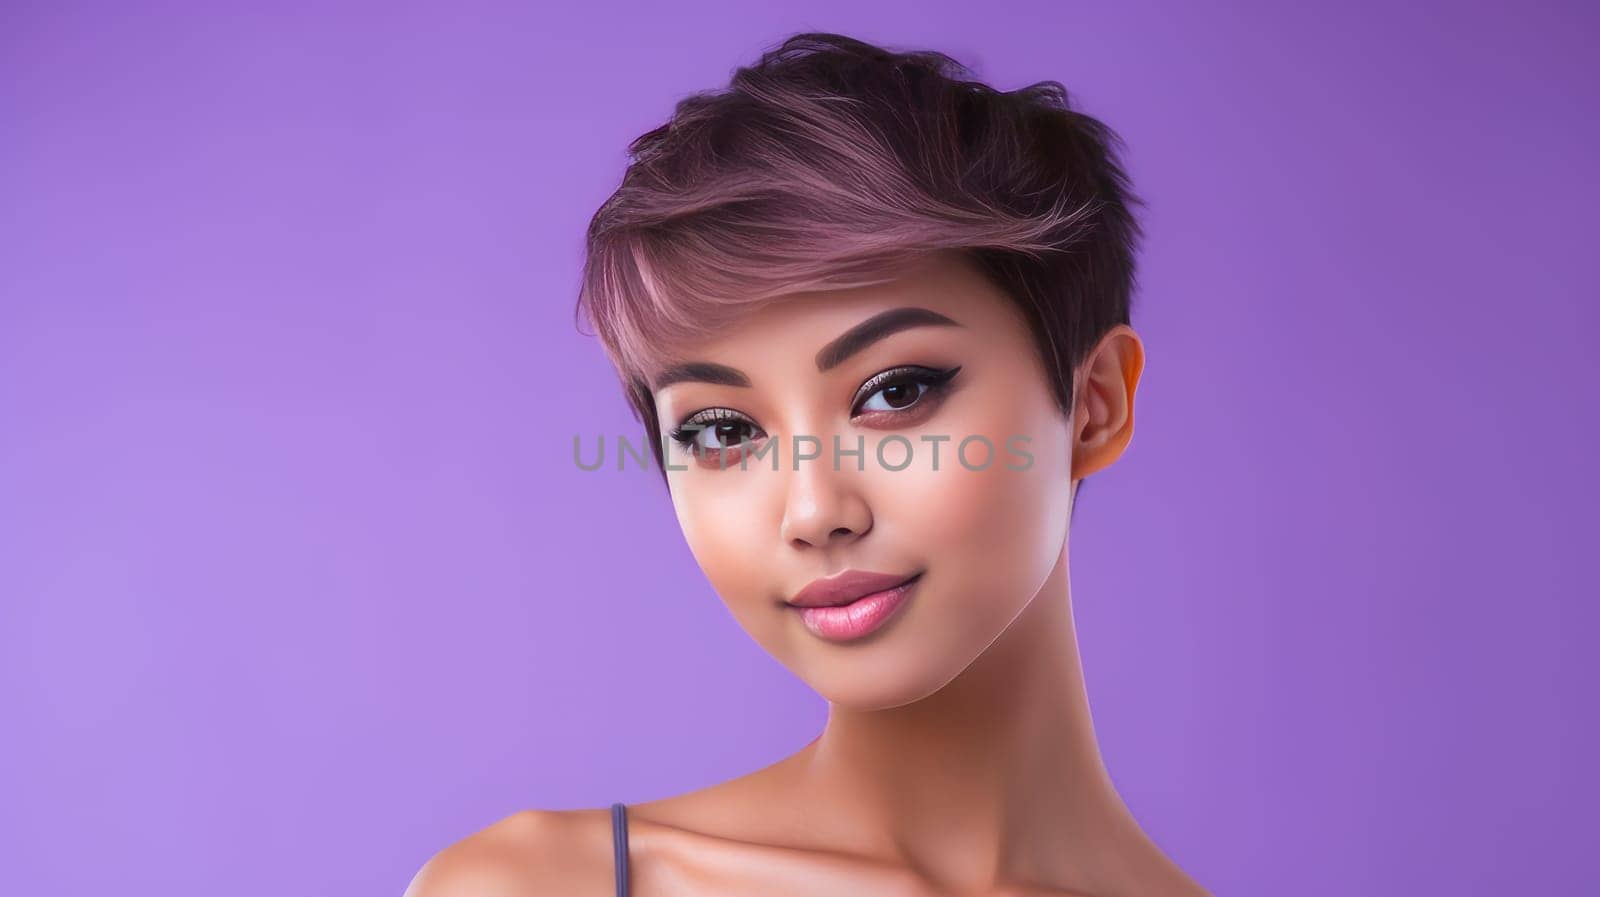 Portrait of a beautiful, sexy, smiling Asian woman with short hair, with perfect skin, purple background, banner. Advertising of cosmetic products, spa treatments, shampoos and hair care products, medicine, perfumes and cosmetology